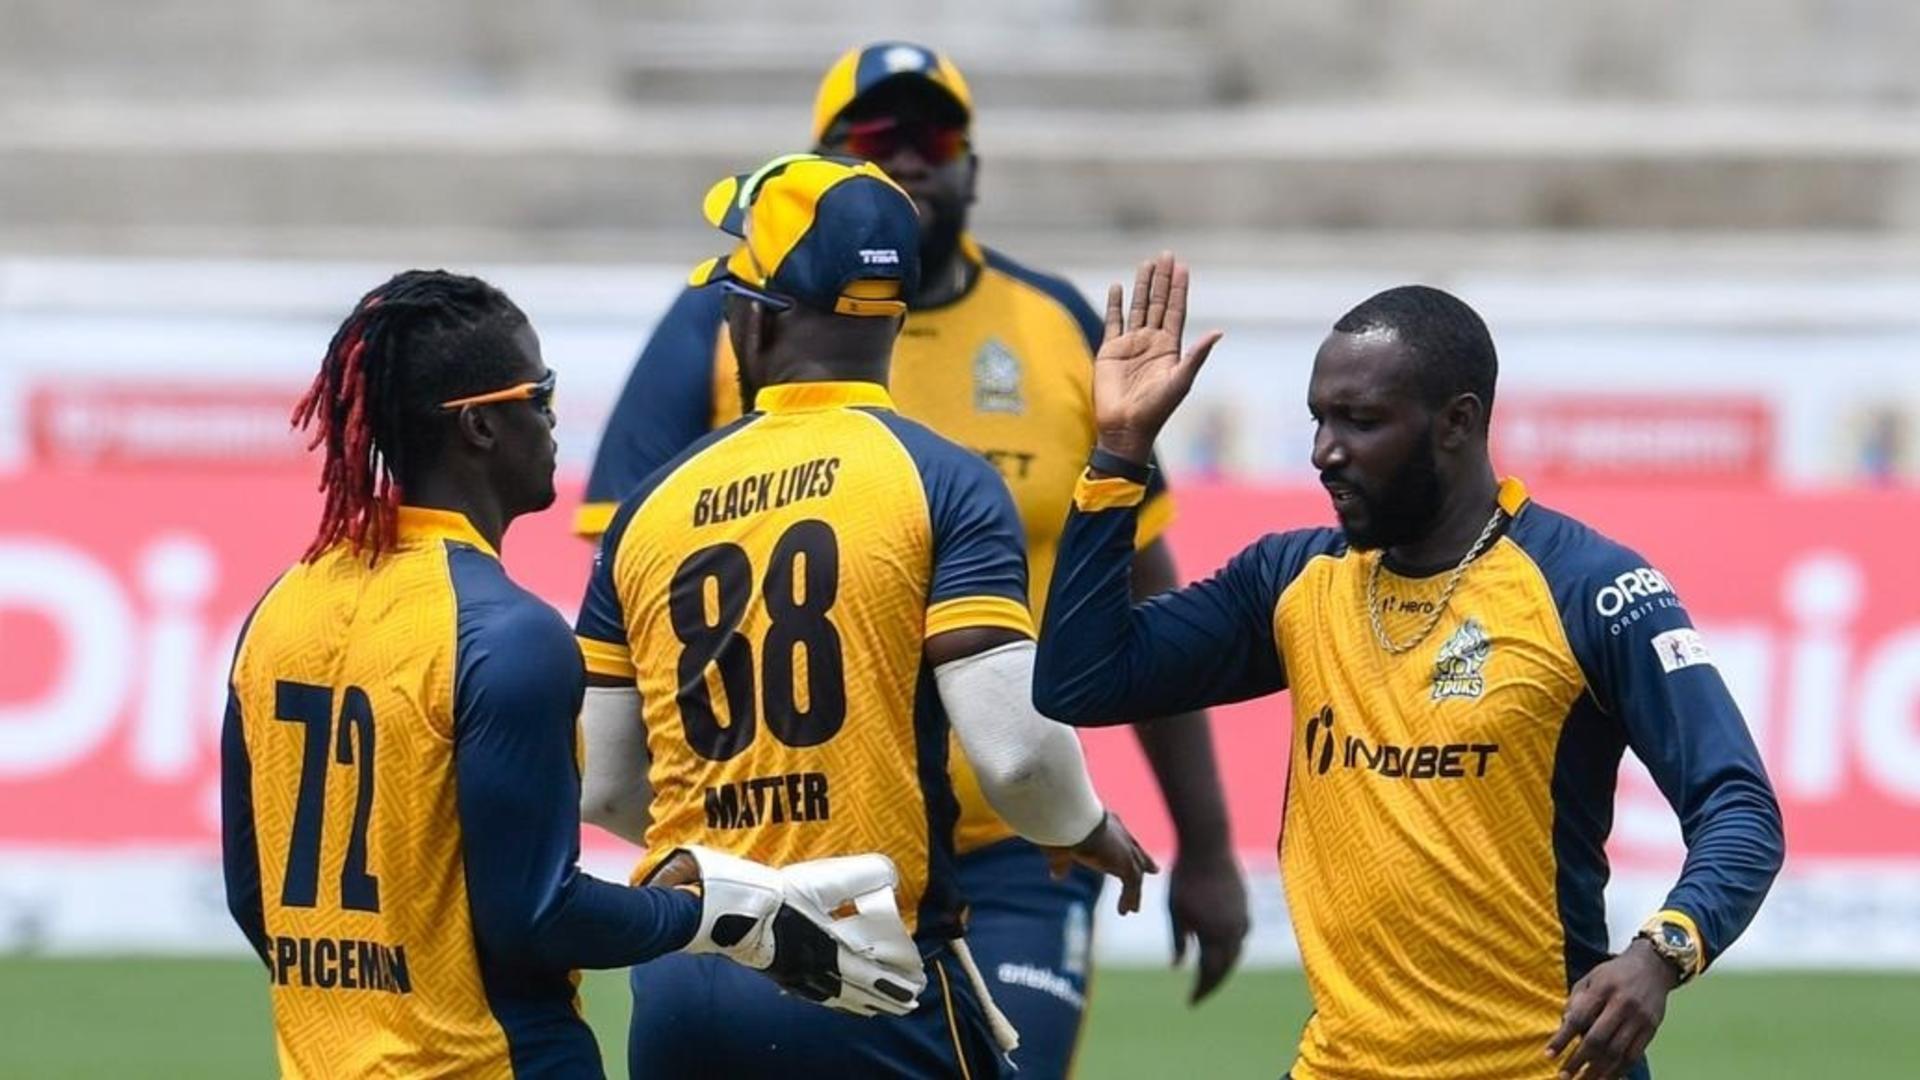 Chance to end group stages on a high, as Zouks take on Jamaica Tallawahs